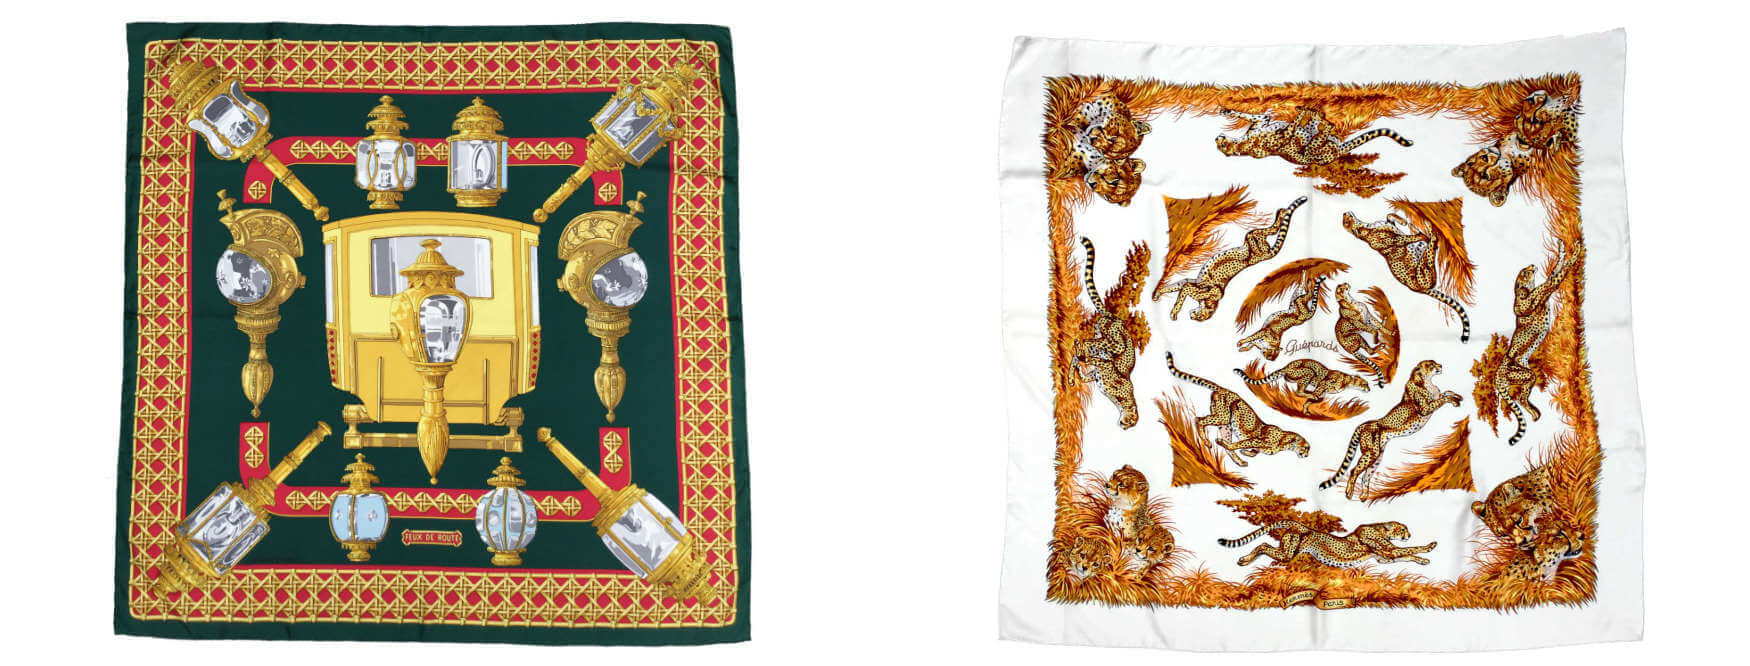 the hermes scarf